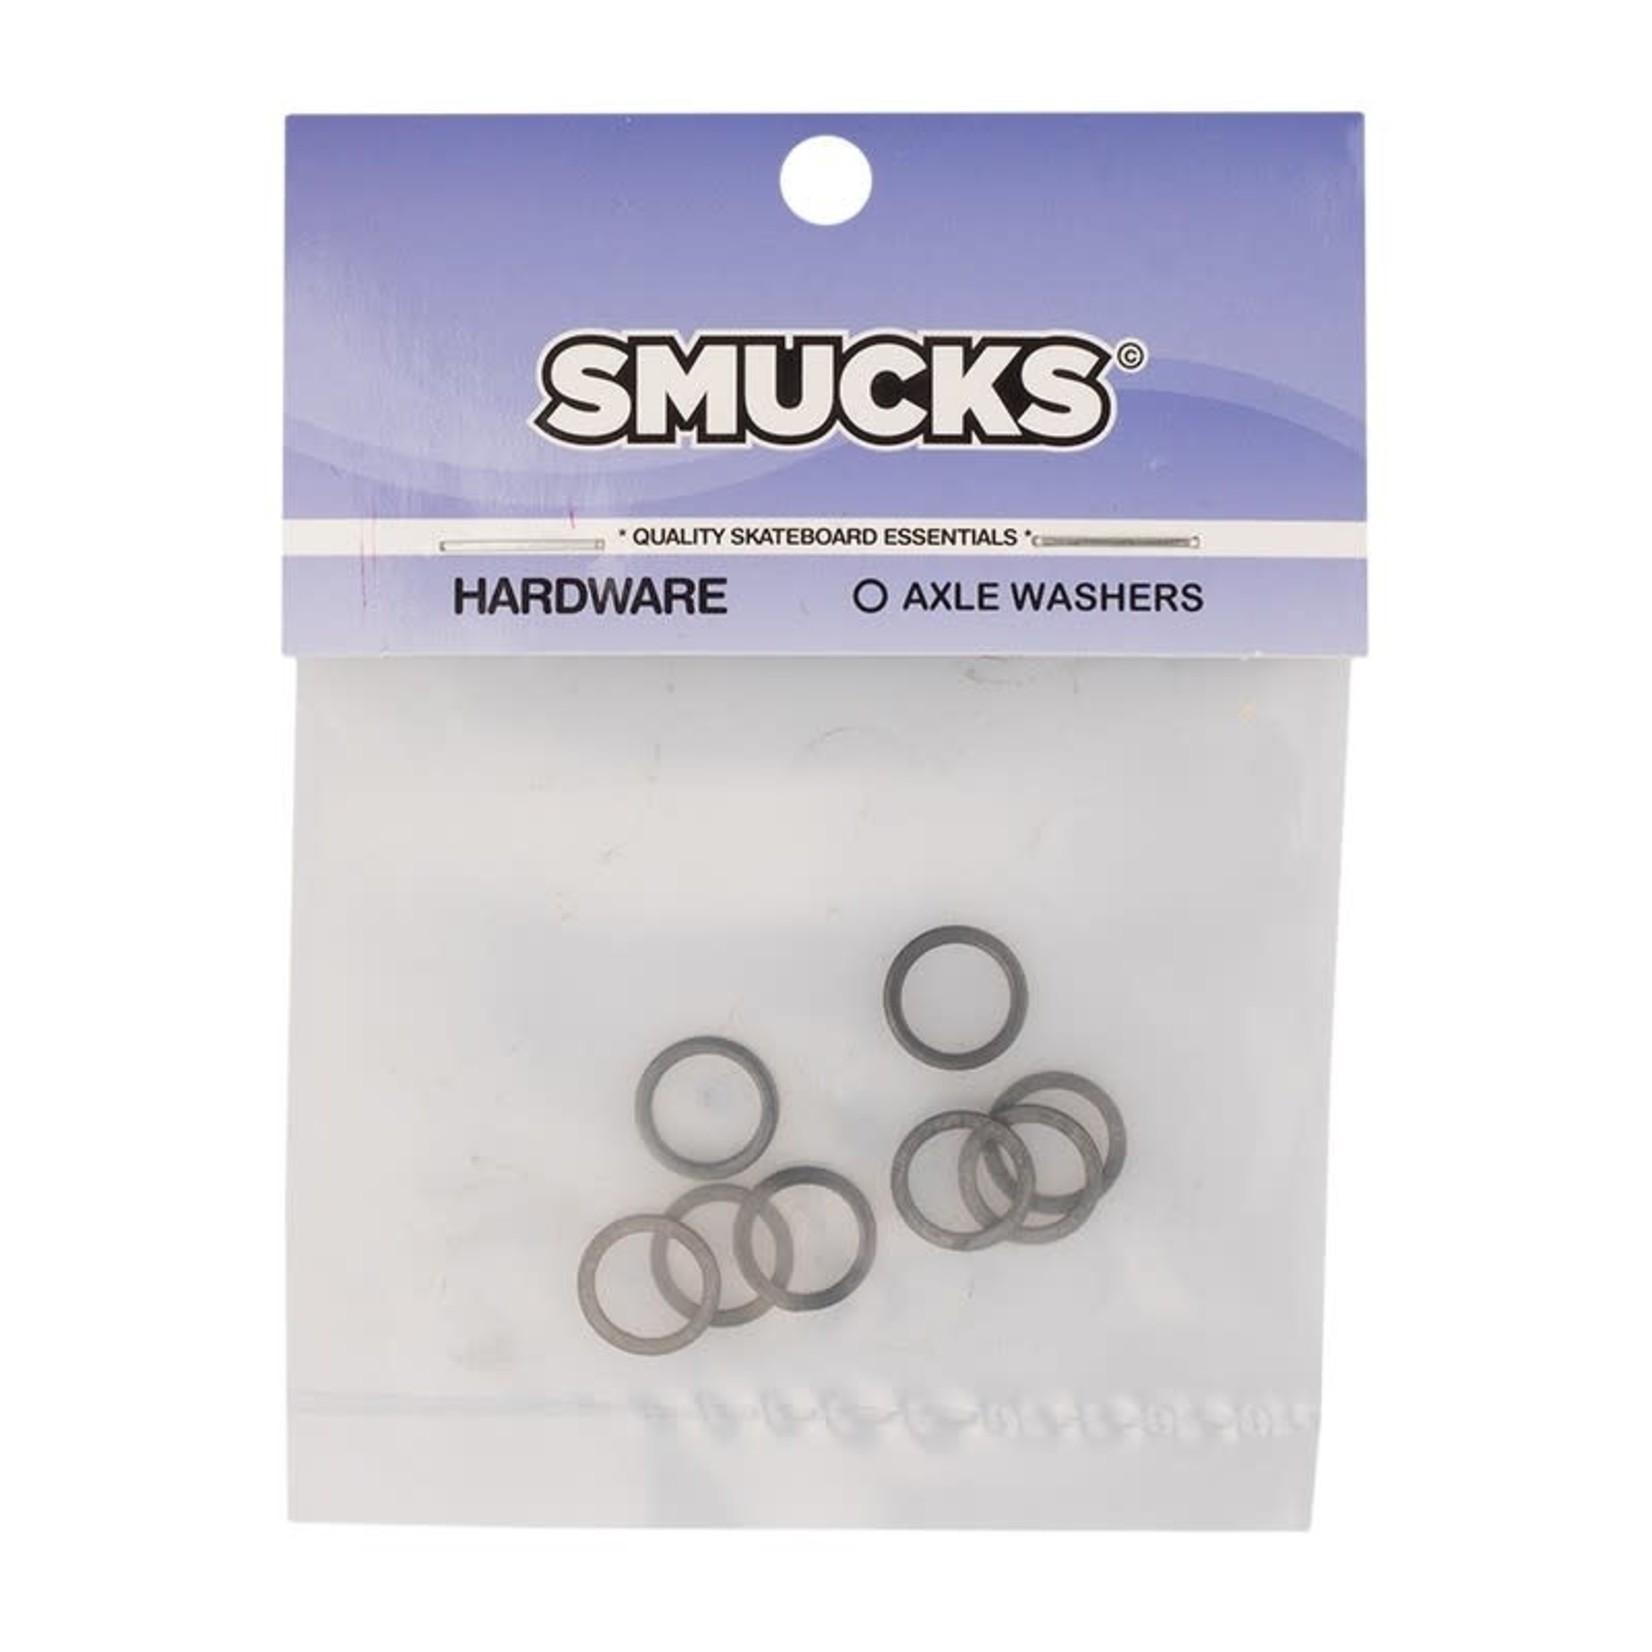 SMUCKS Smucks Axle Washers 8 Pack